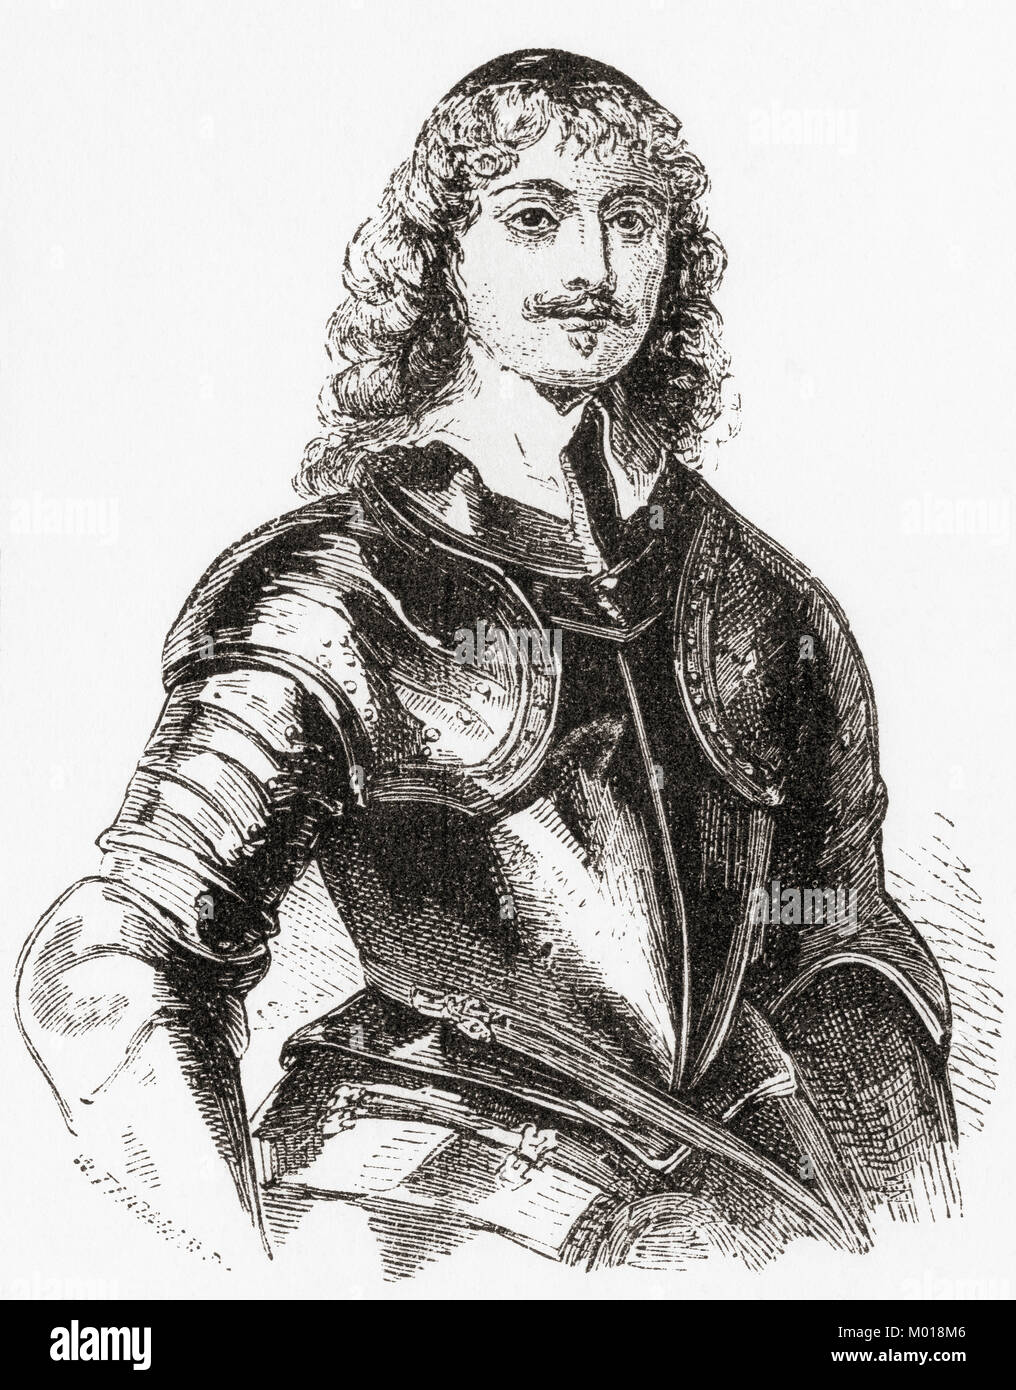 James Graham, 1st Marquess of Montrose, 1612 – 1650.  Scottish nobleman, poet and soldier.  From Ward and Lock's Illustrated History of the World, published c.1882. Stock Photo